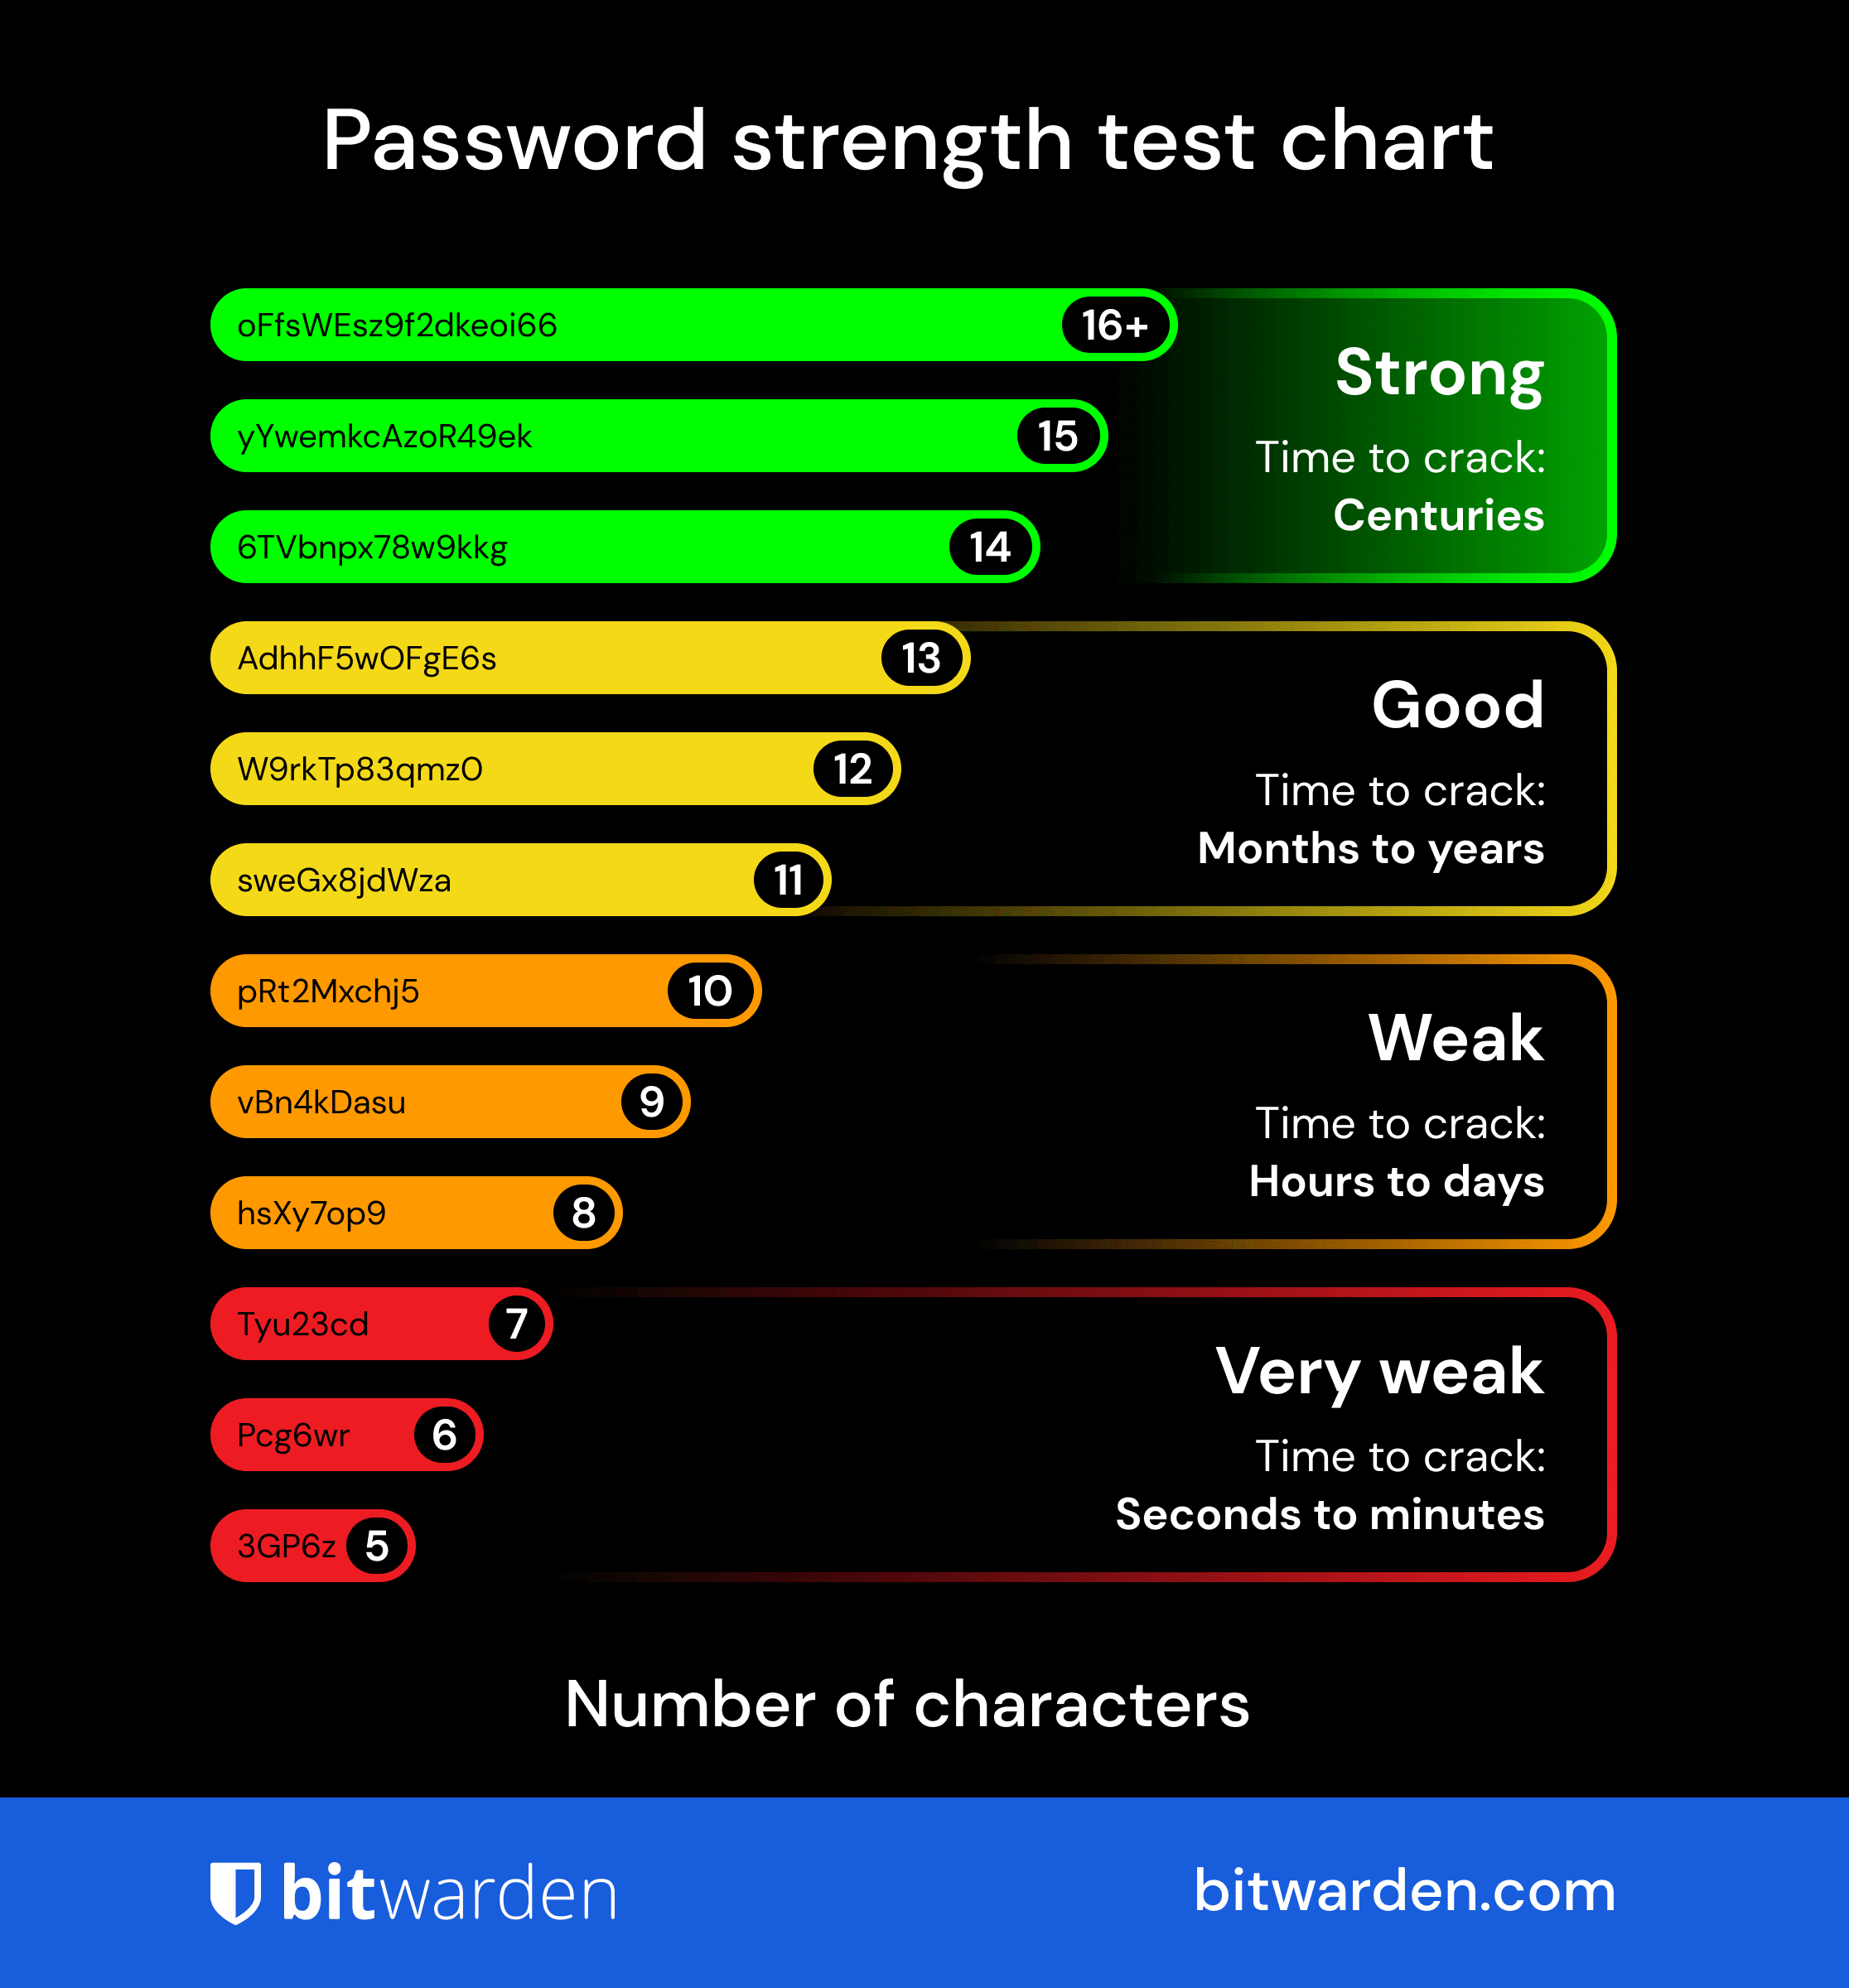 Password Strength Test Chart - Save the Password Strength Test Chart to guide your next password decisions. Bitwarden uses the zxcvbn tool for reliable password strength calculations.